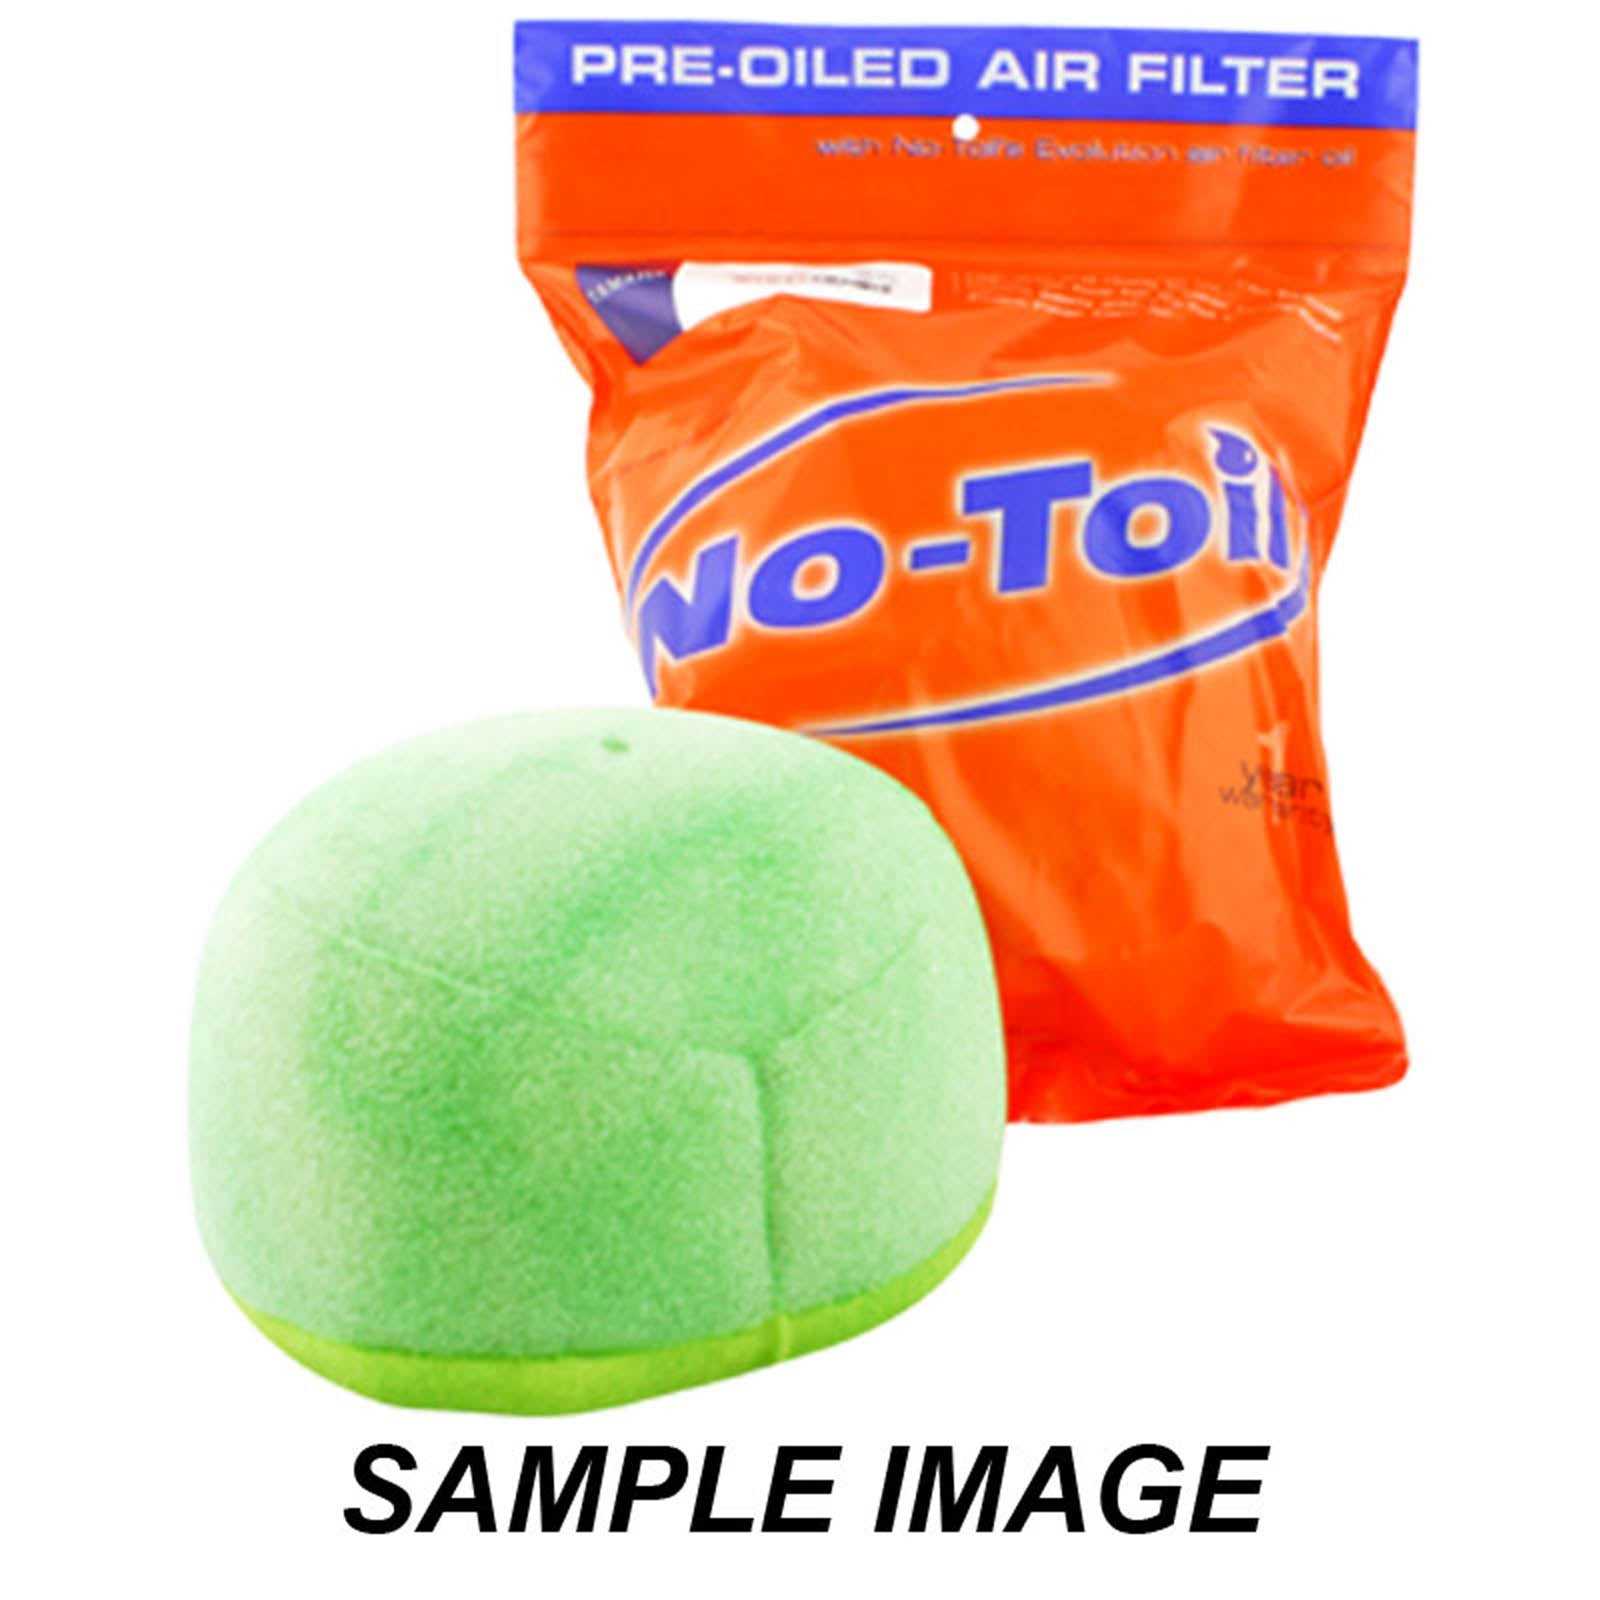 No-Toil, PRE-OILED FILTER HON CRF150F/230 03-